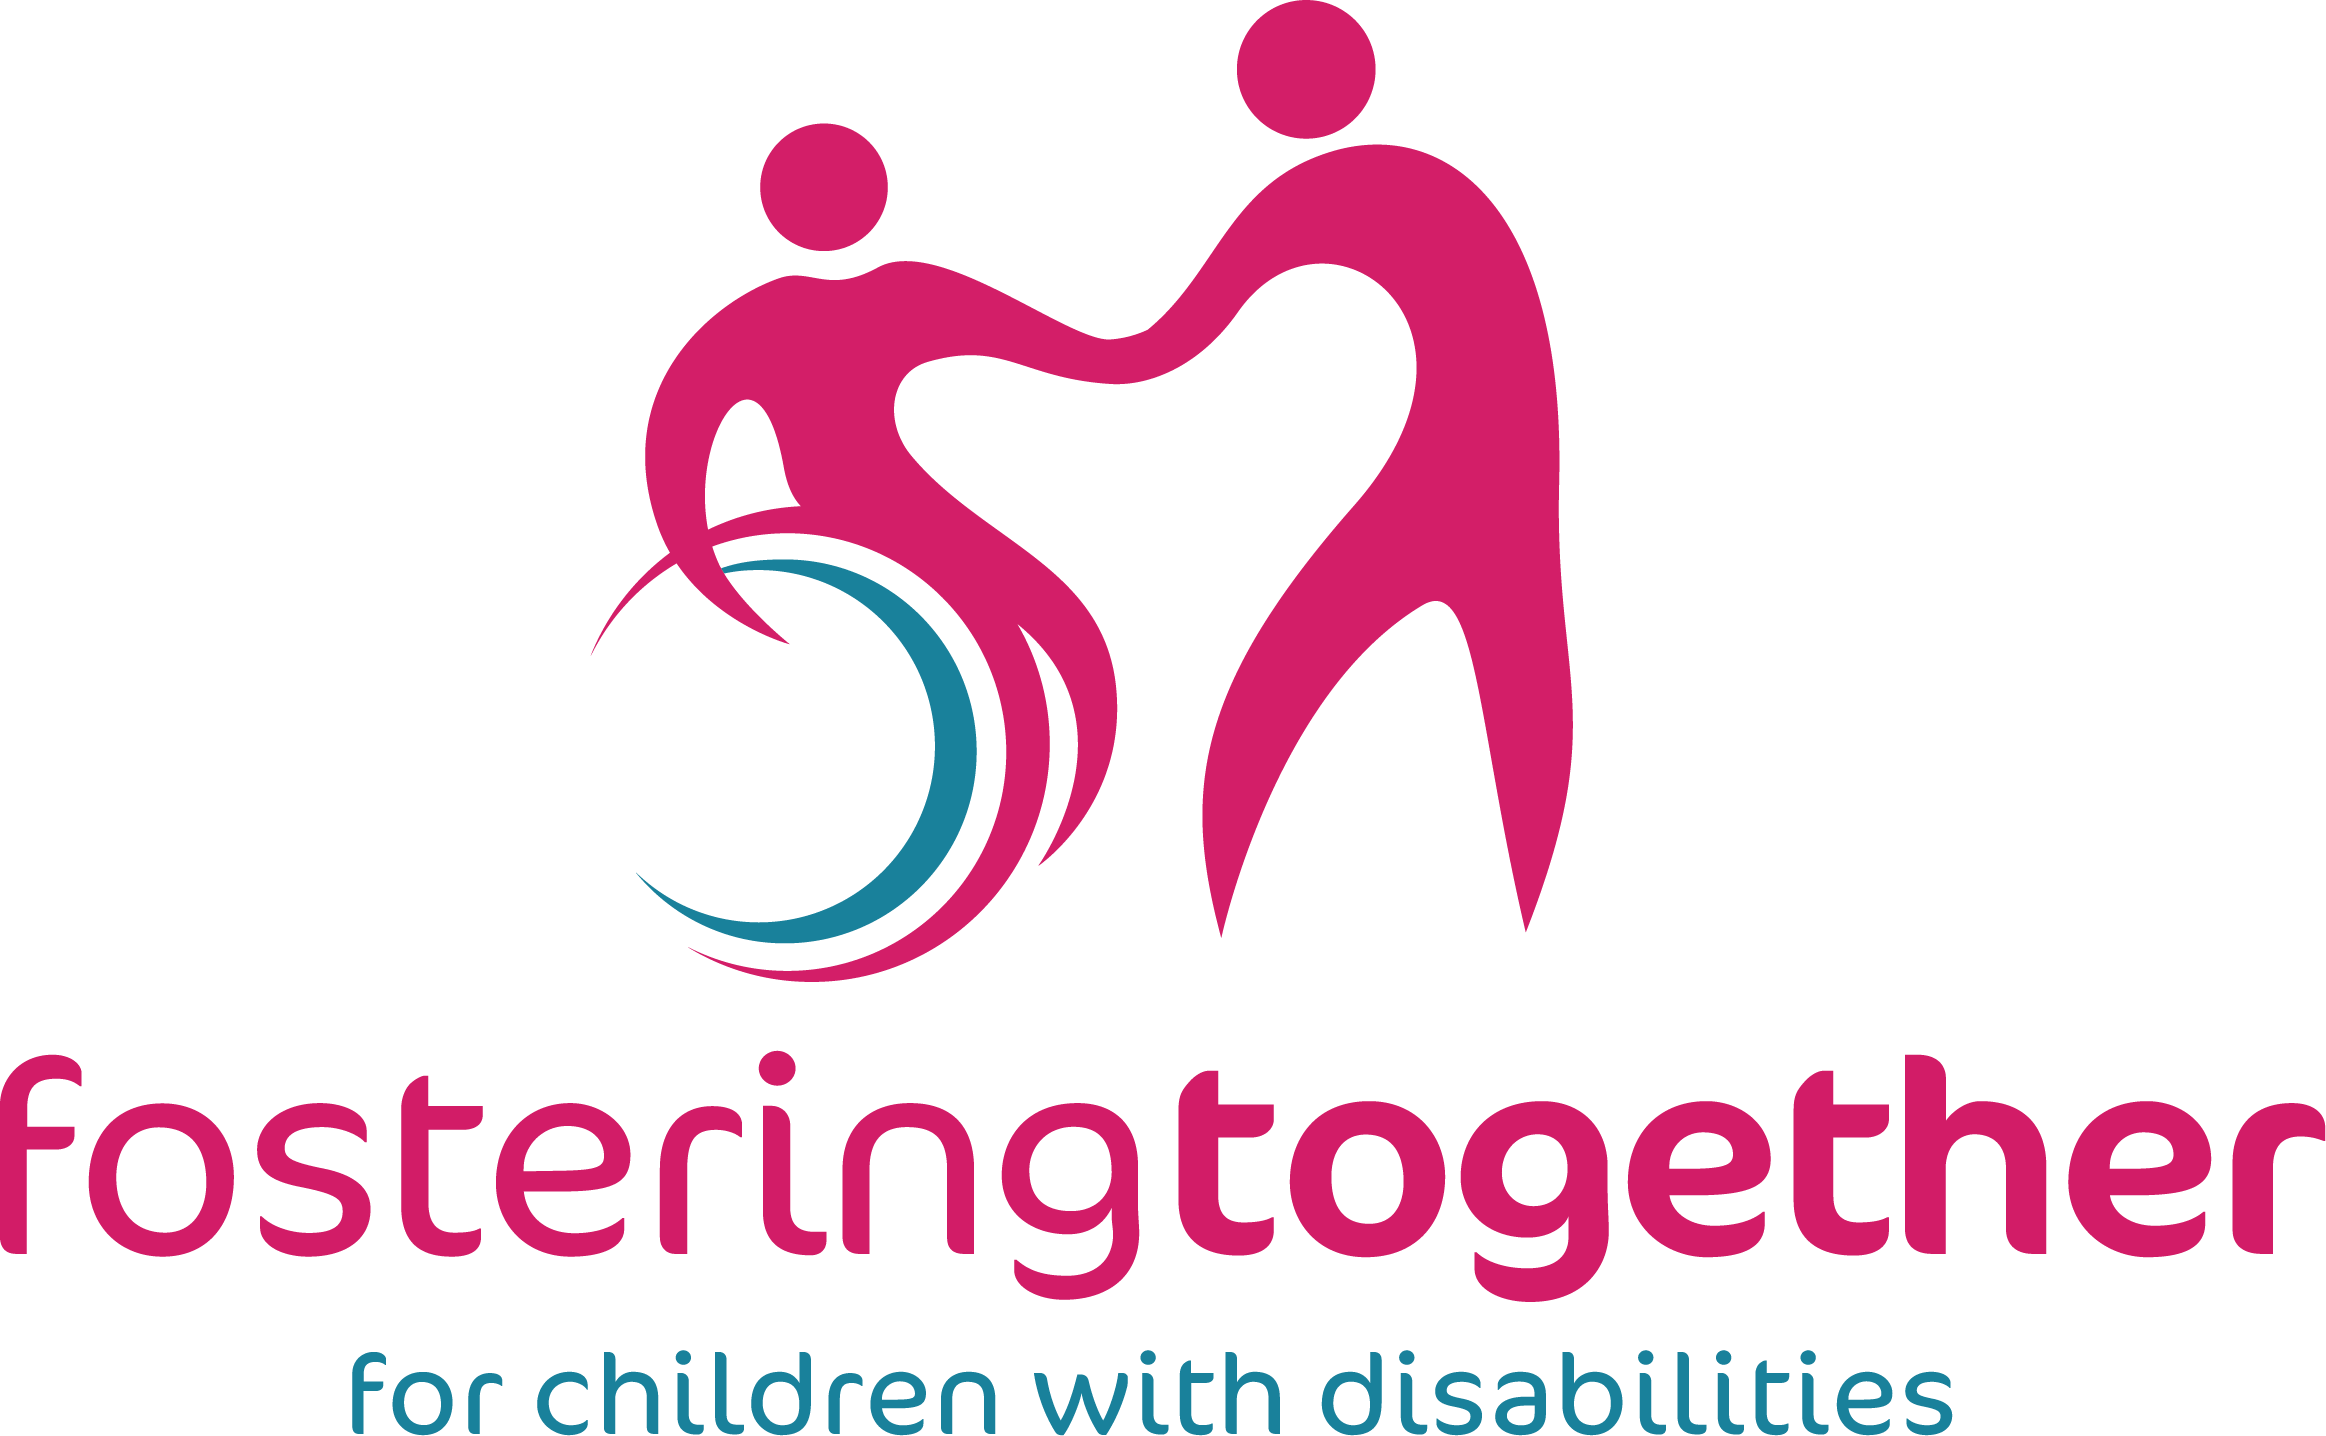 Company logo image - Fostering Together